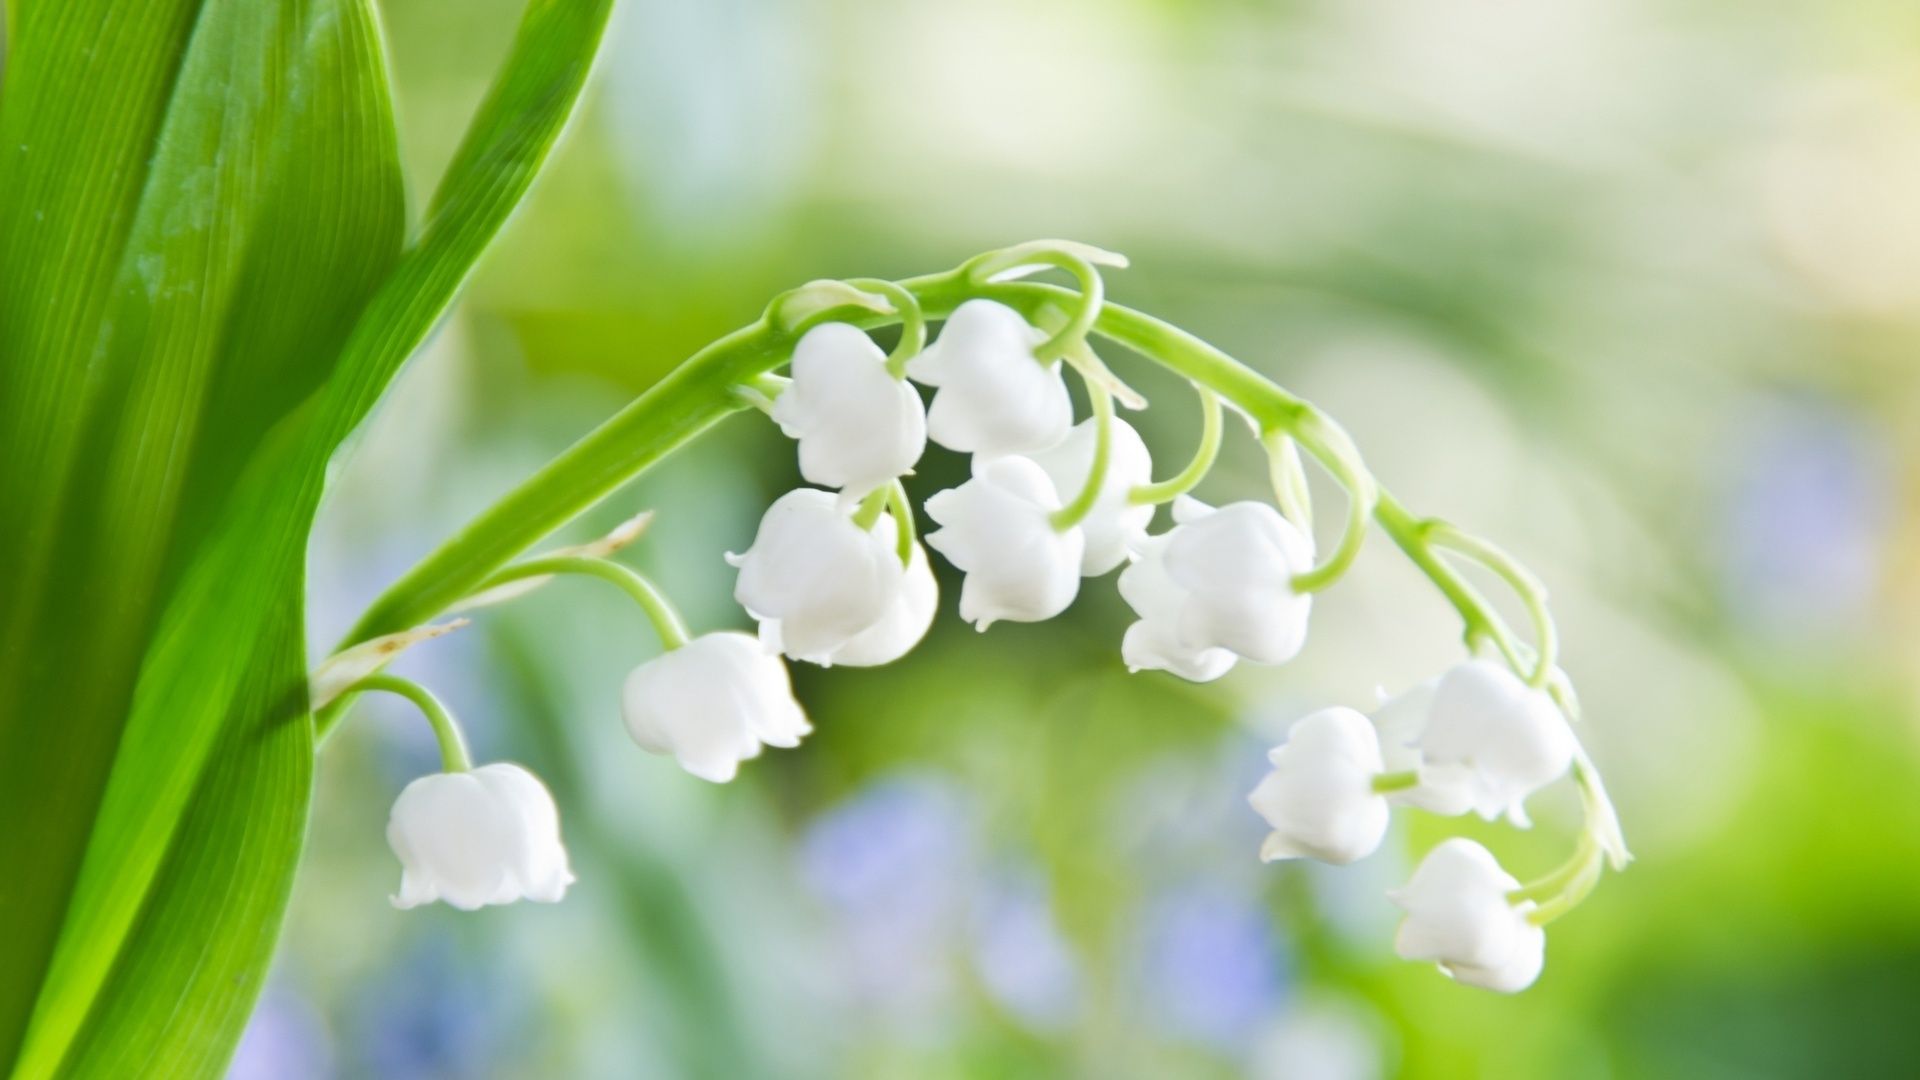 spring flowers flowers wallpaper, Spring flowers image, Lily of the valley flowers